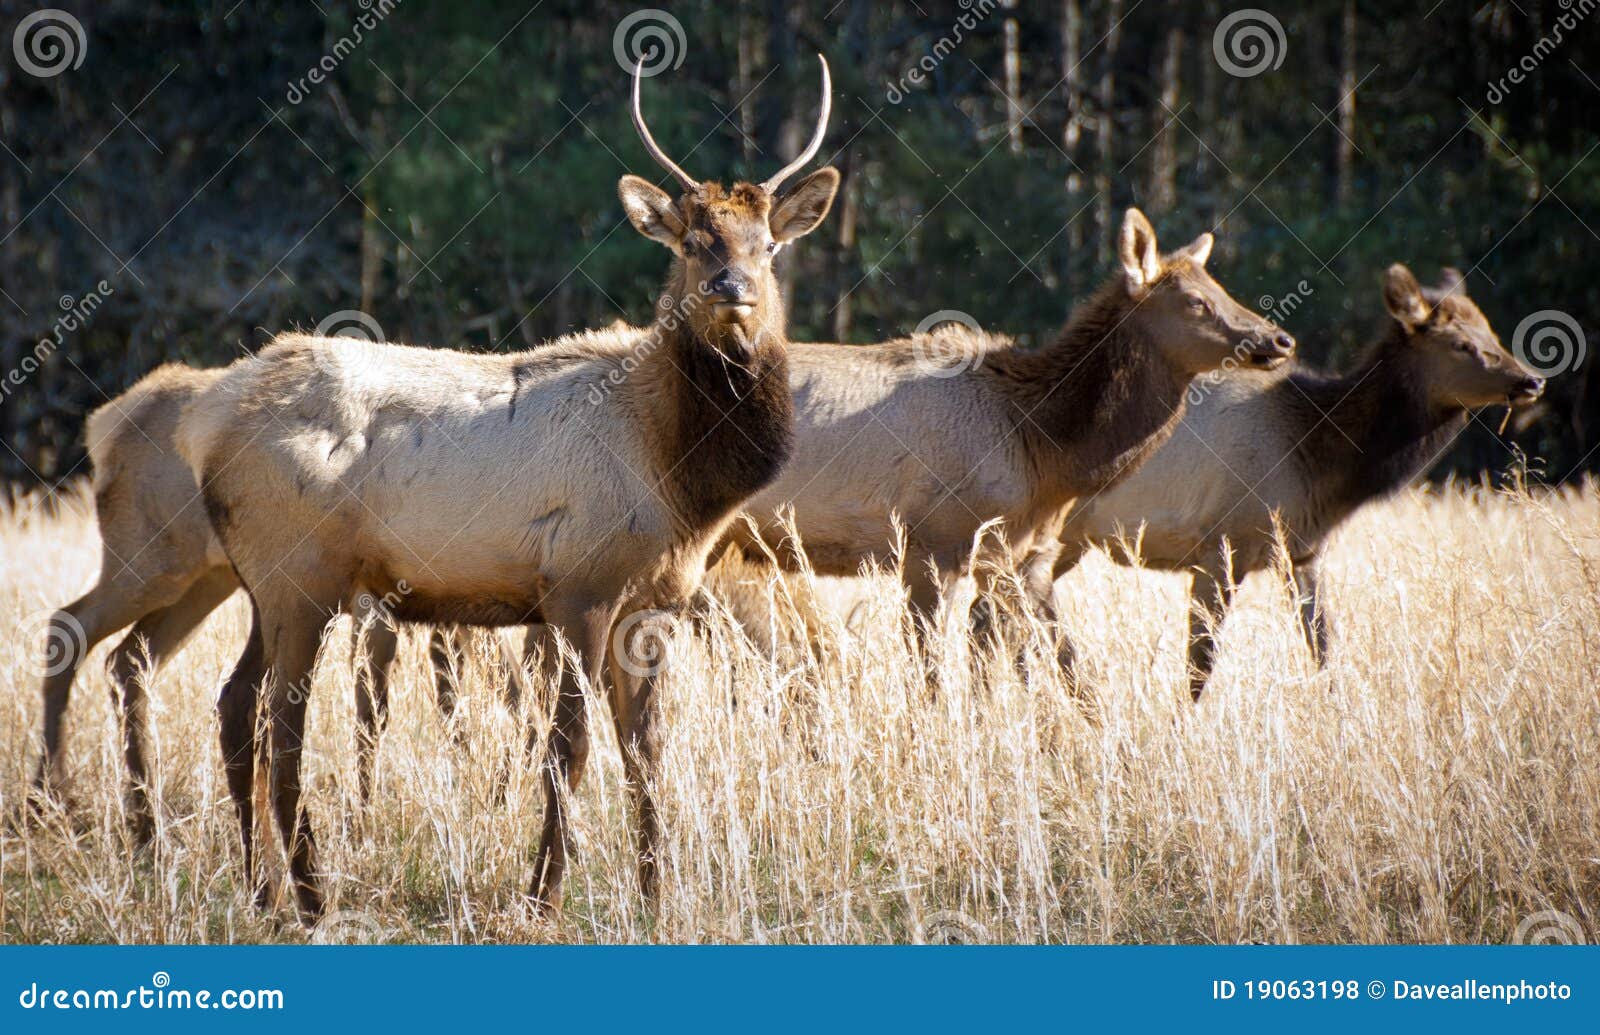 elk wildlife photography in great smoky mountains